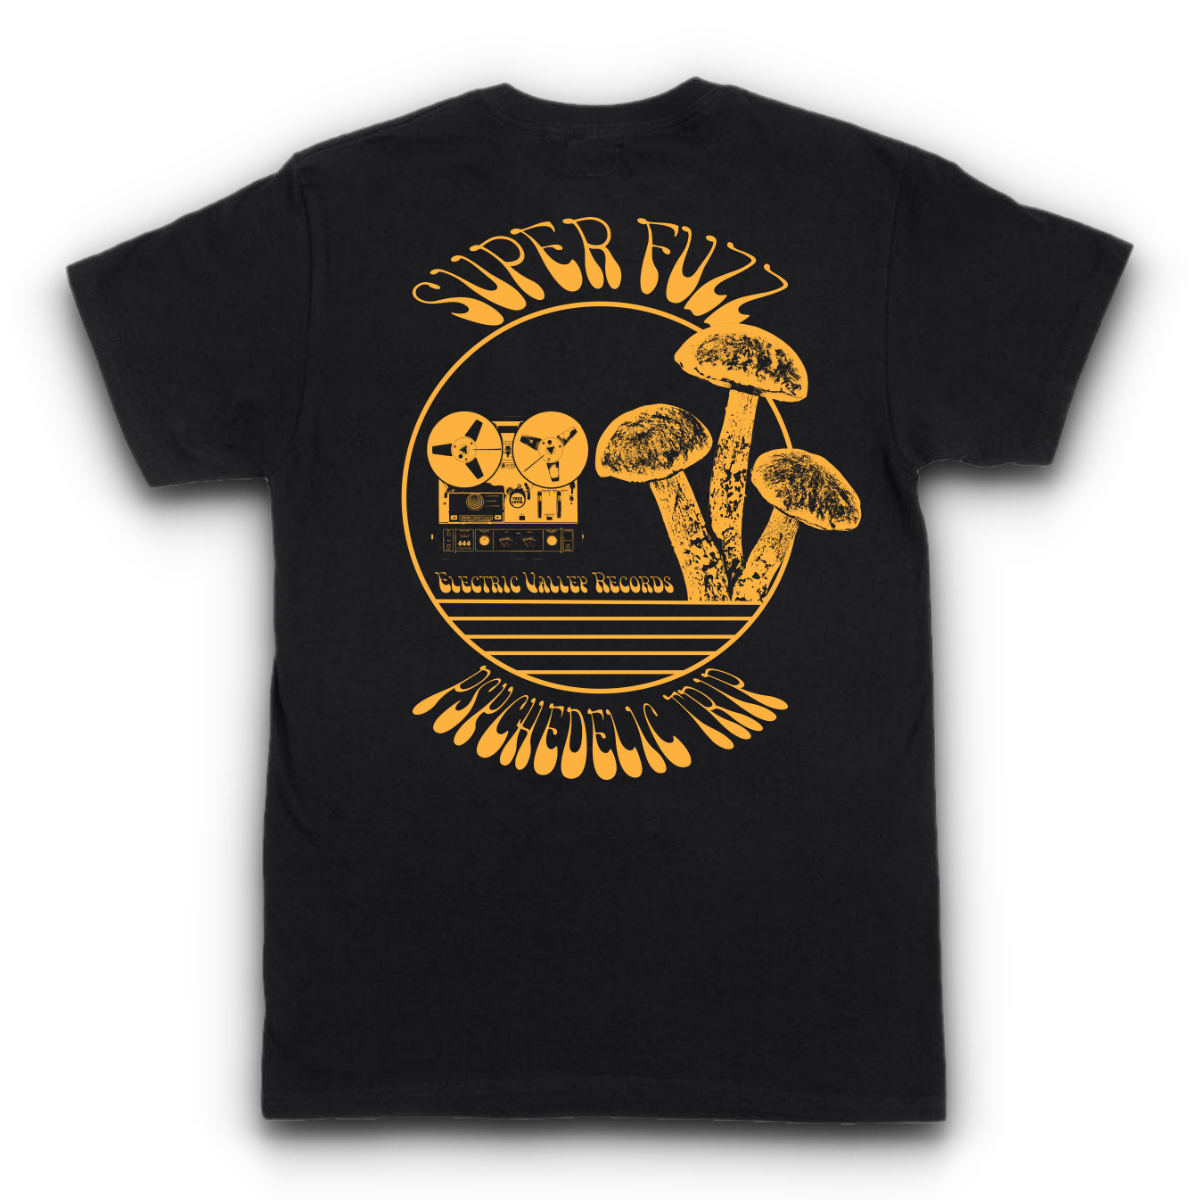 Super Fuzz T-shirt | ELECTRIC VALLEY RECORDS